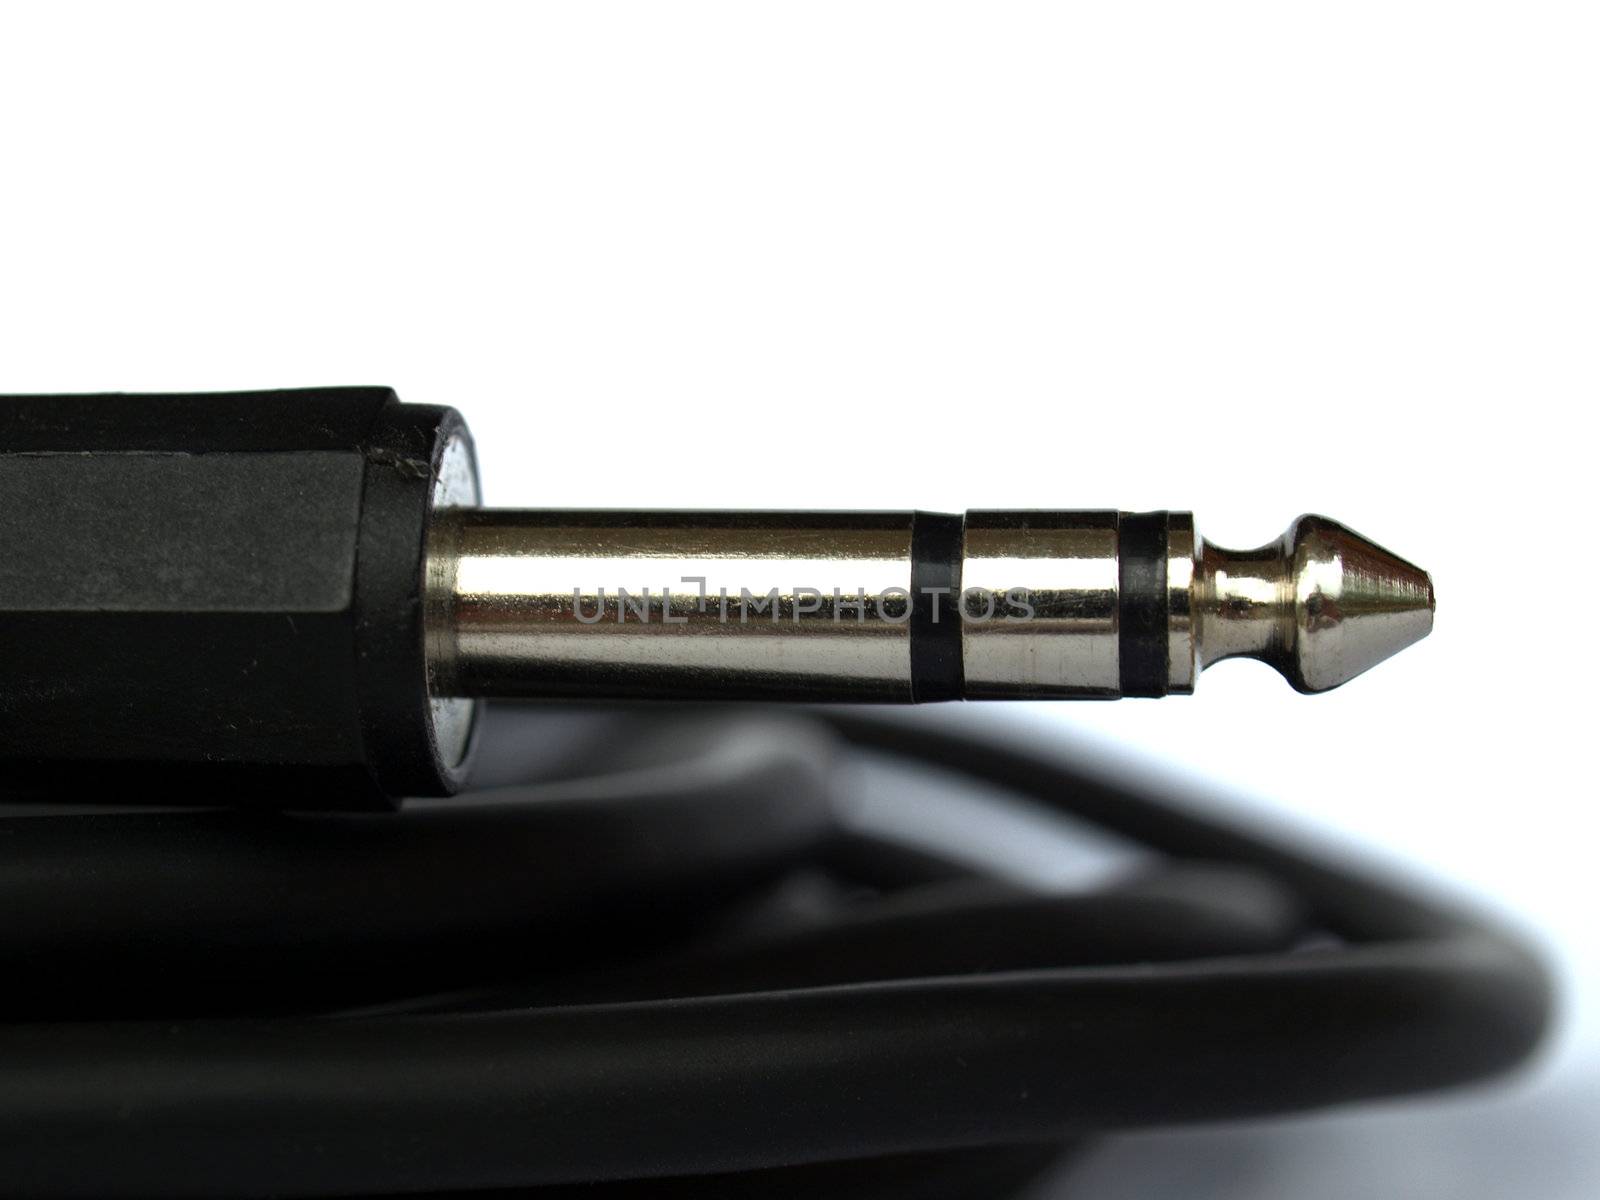 Stereo audio jack plug for cables used in music recording studio and live music event